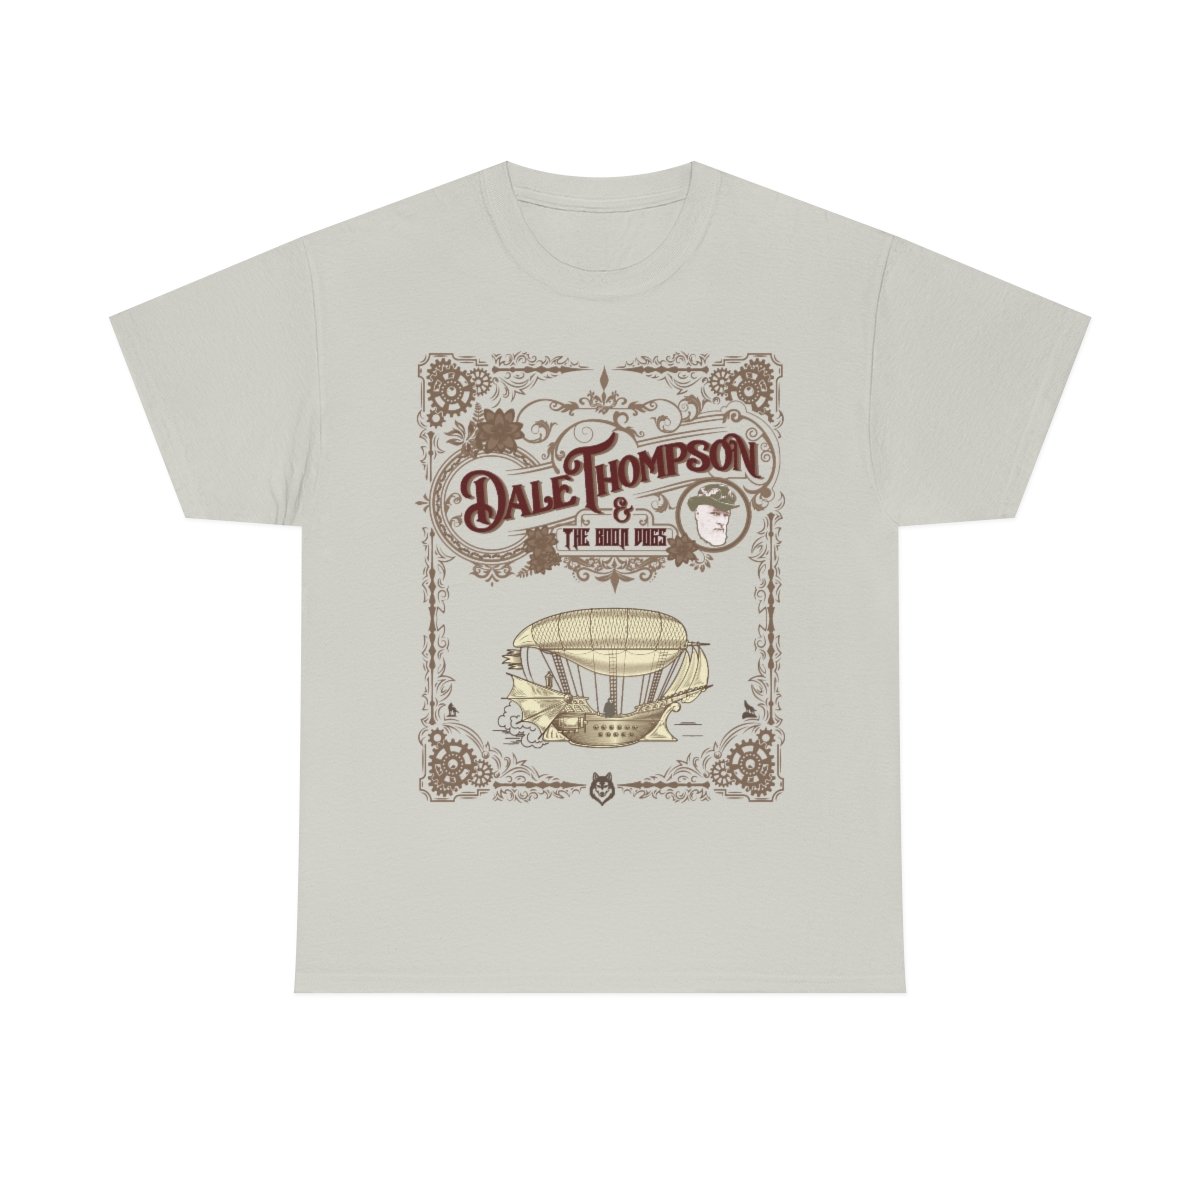 Dale Thompson and the Boon Dogs Short Sleeve Tshirt (5000)